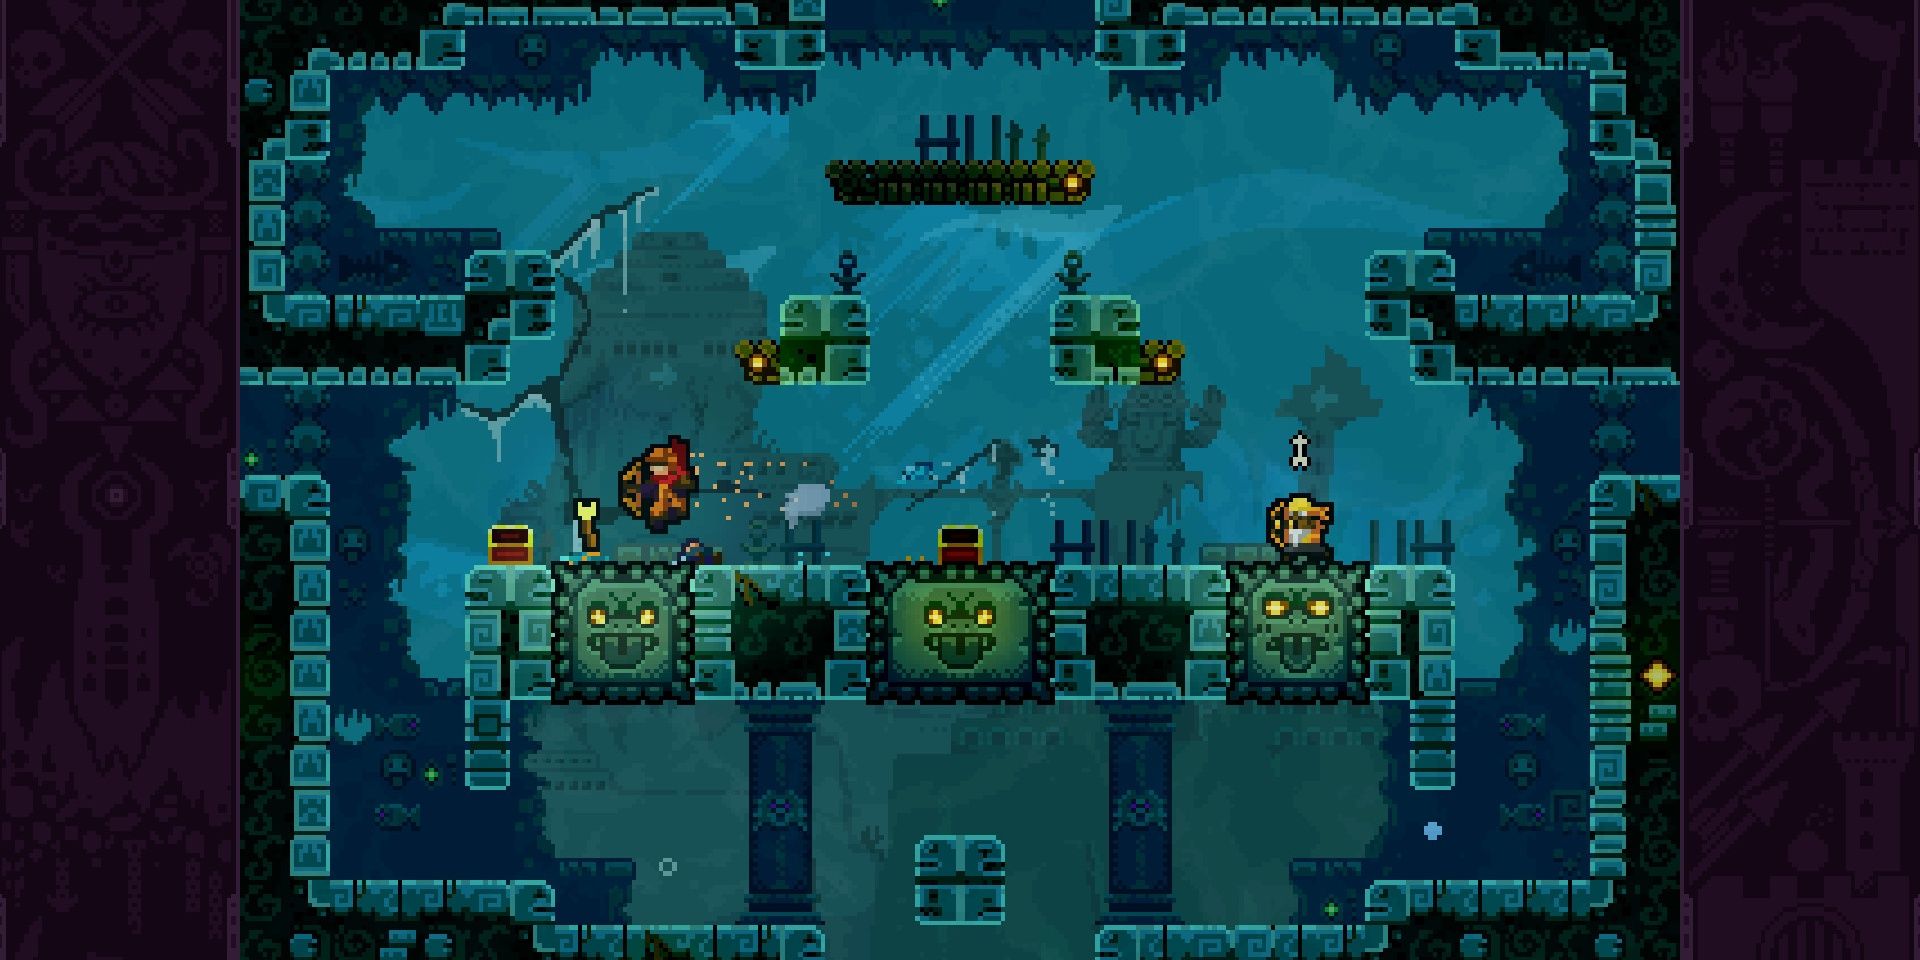 A spooky level where two archers fight each other in TowerFall